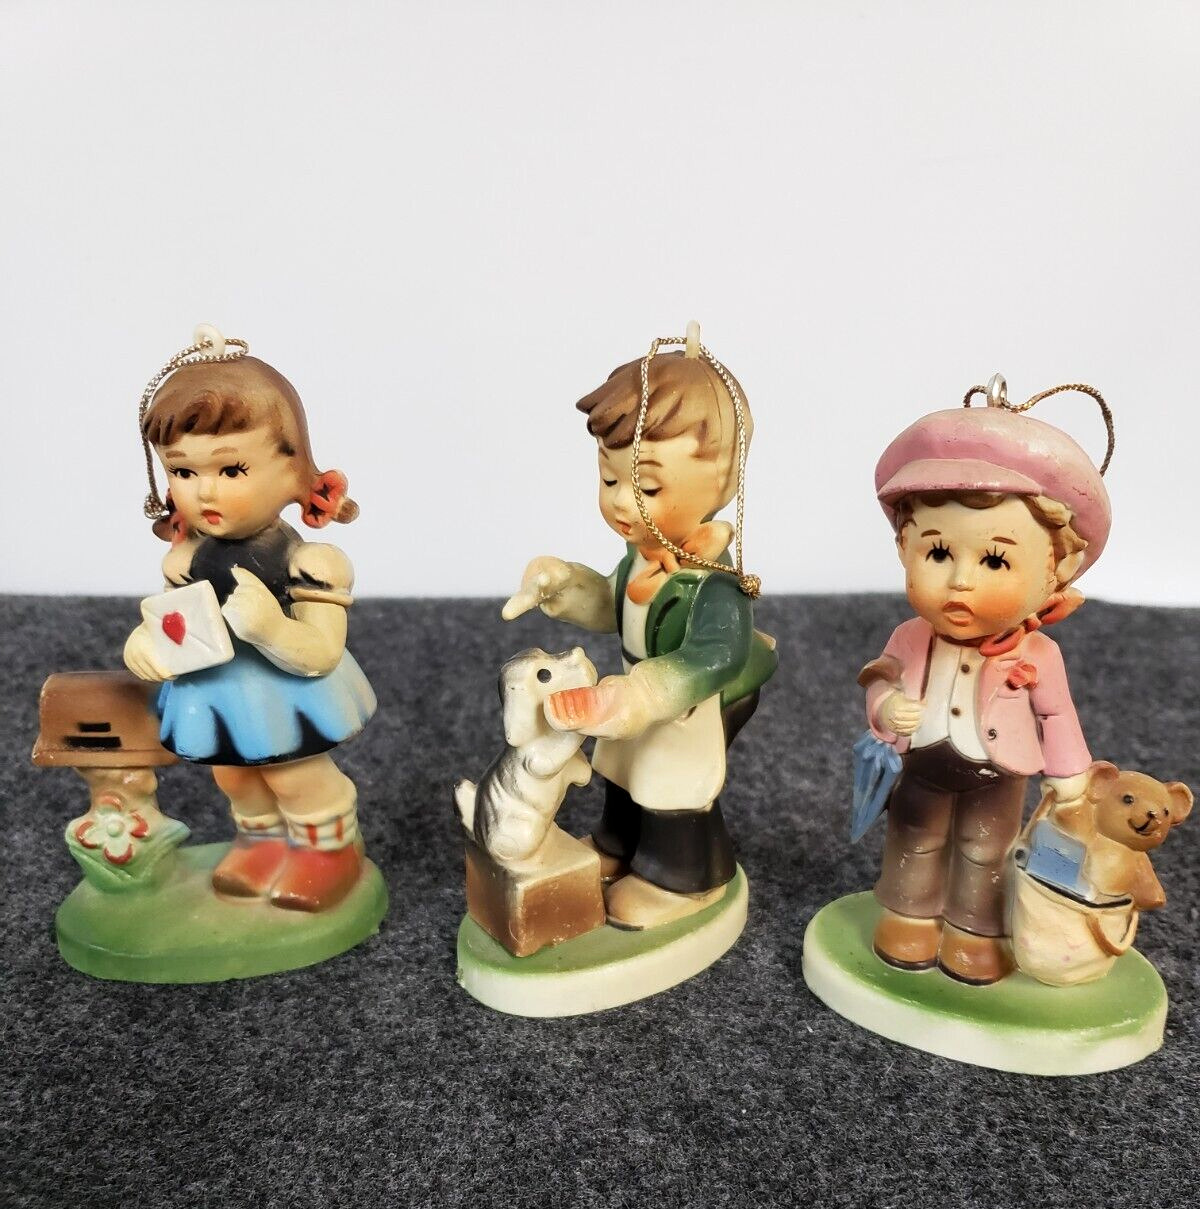 3 Vintage Children Figurines Ornaments Hard Plastic Made In Hong Kong 4in